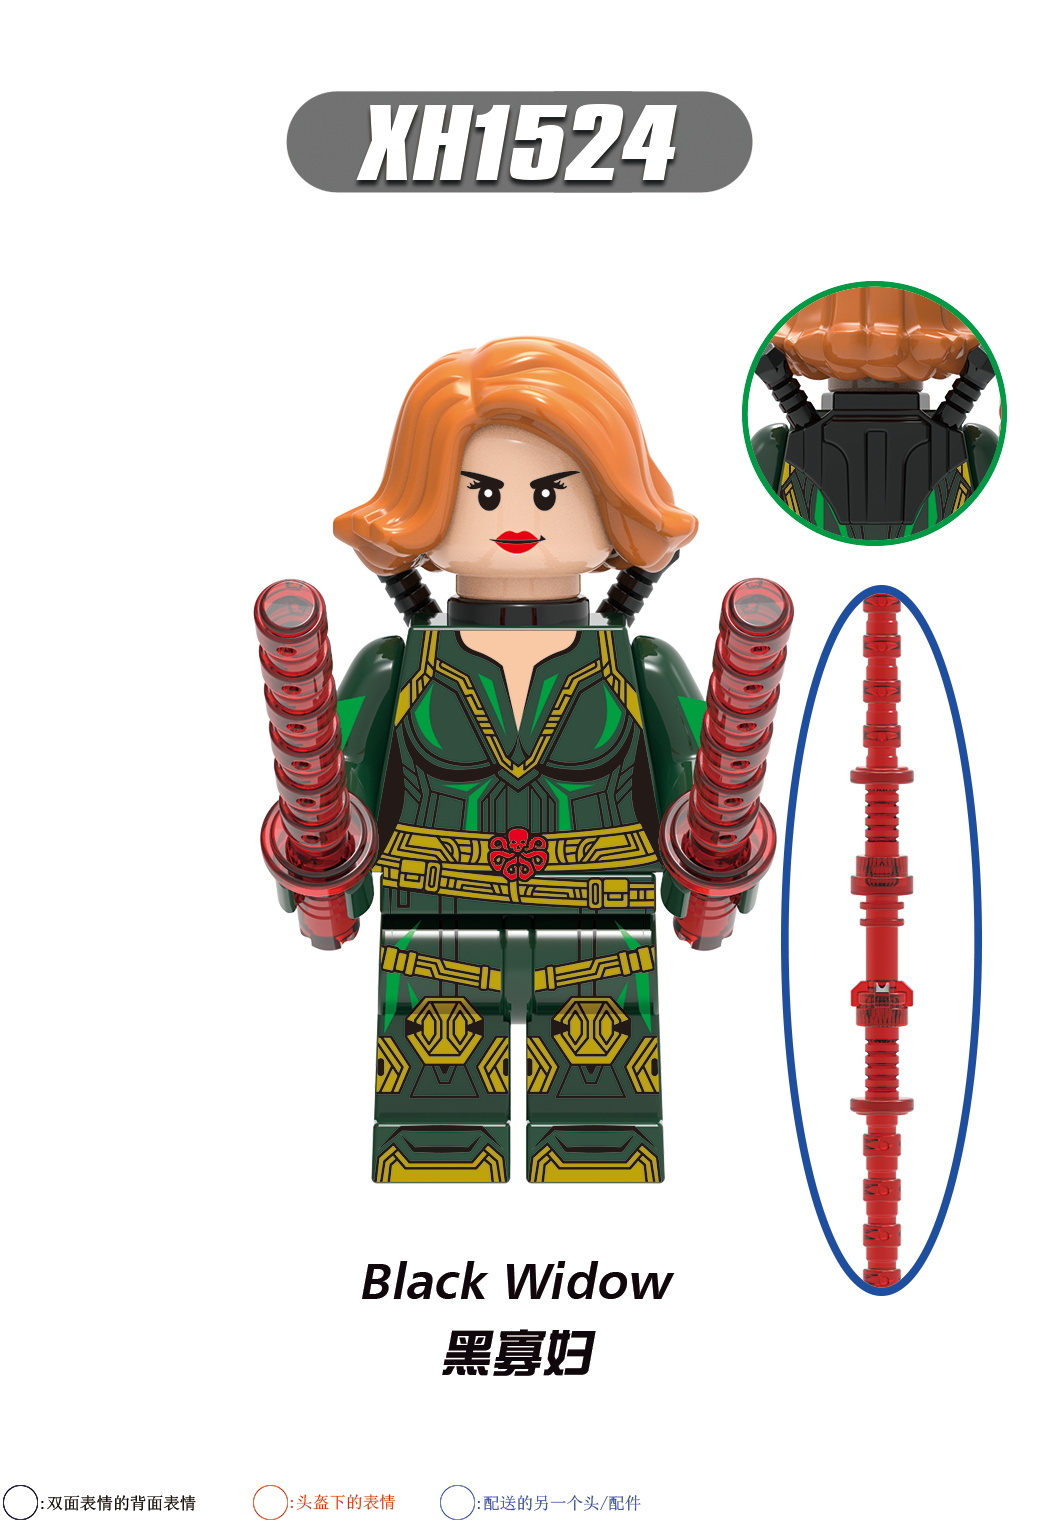 XH1517 1518 1519 1520 1521 1522 1523 1524  Building Blocks Bricks Yelena Taskmaster Black Widow Iron Maiden Red Guardian Action Super Educational Toys for Kids Gifts X0289